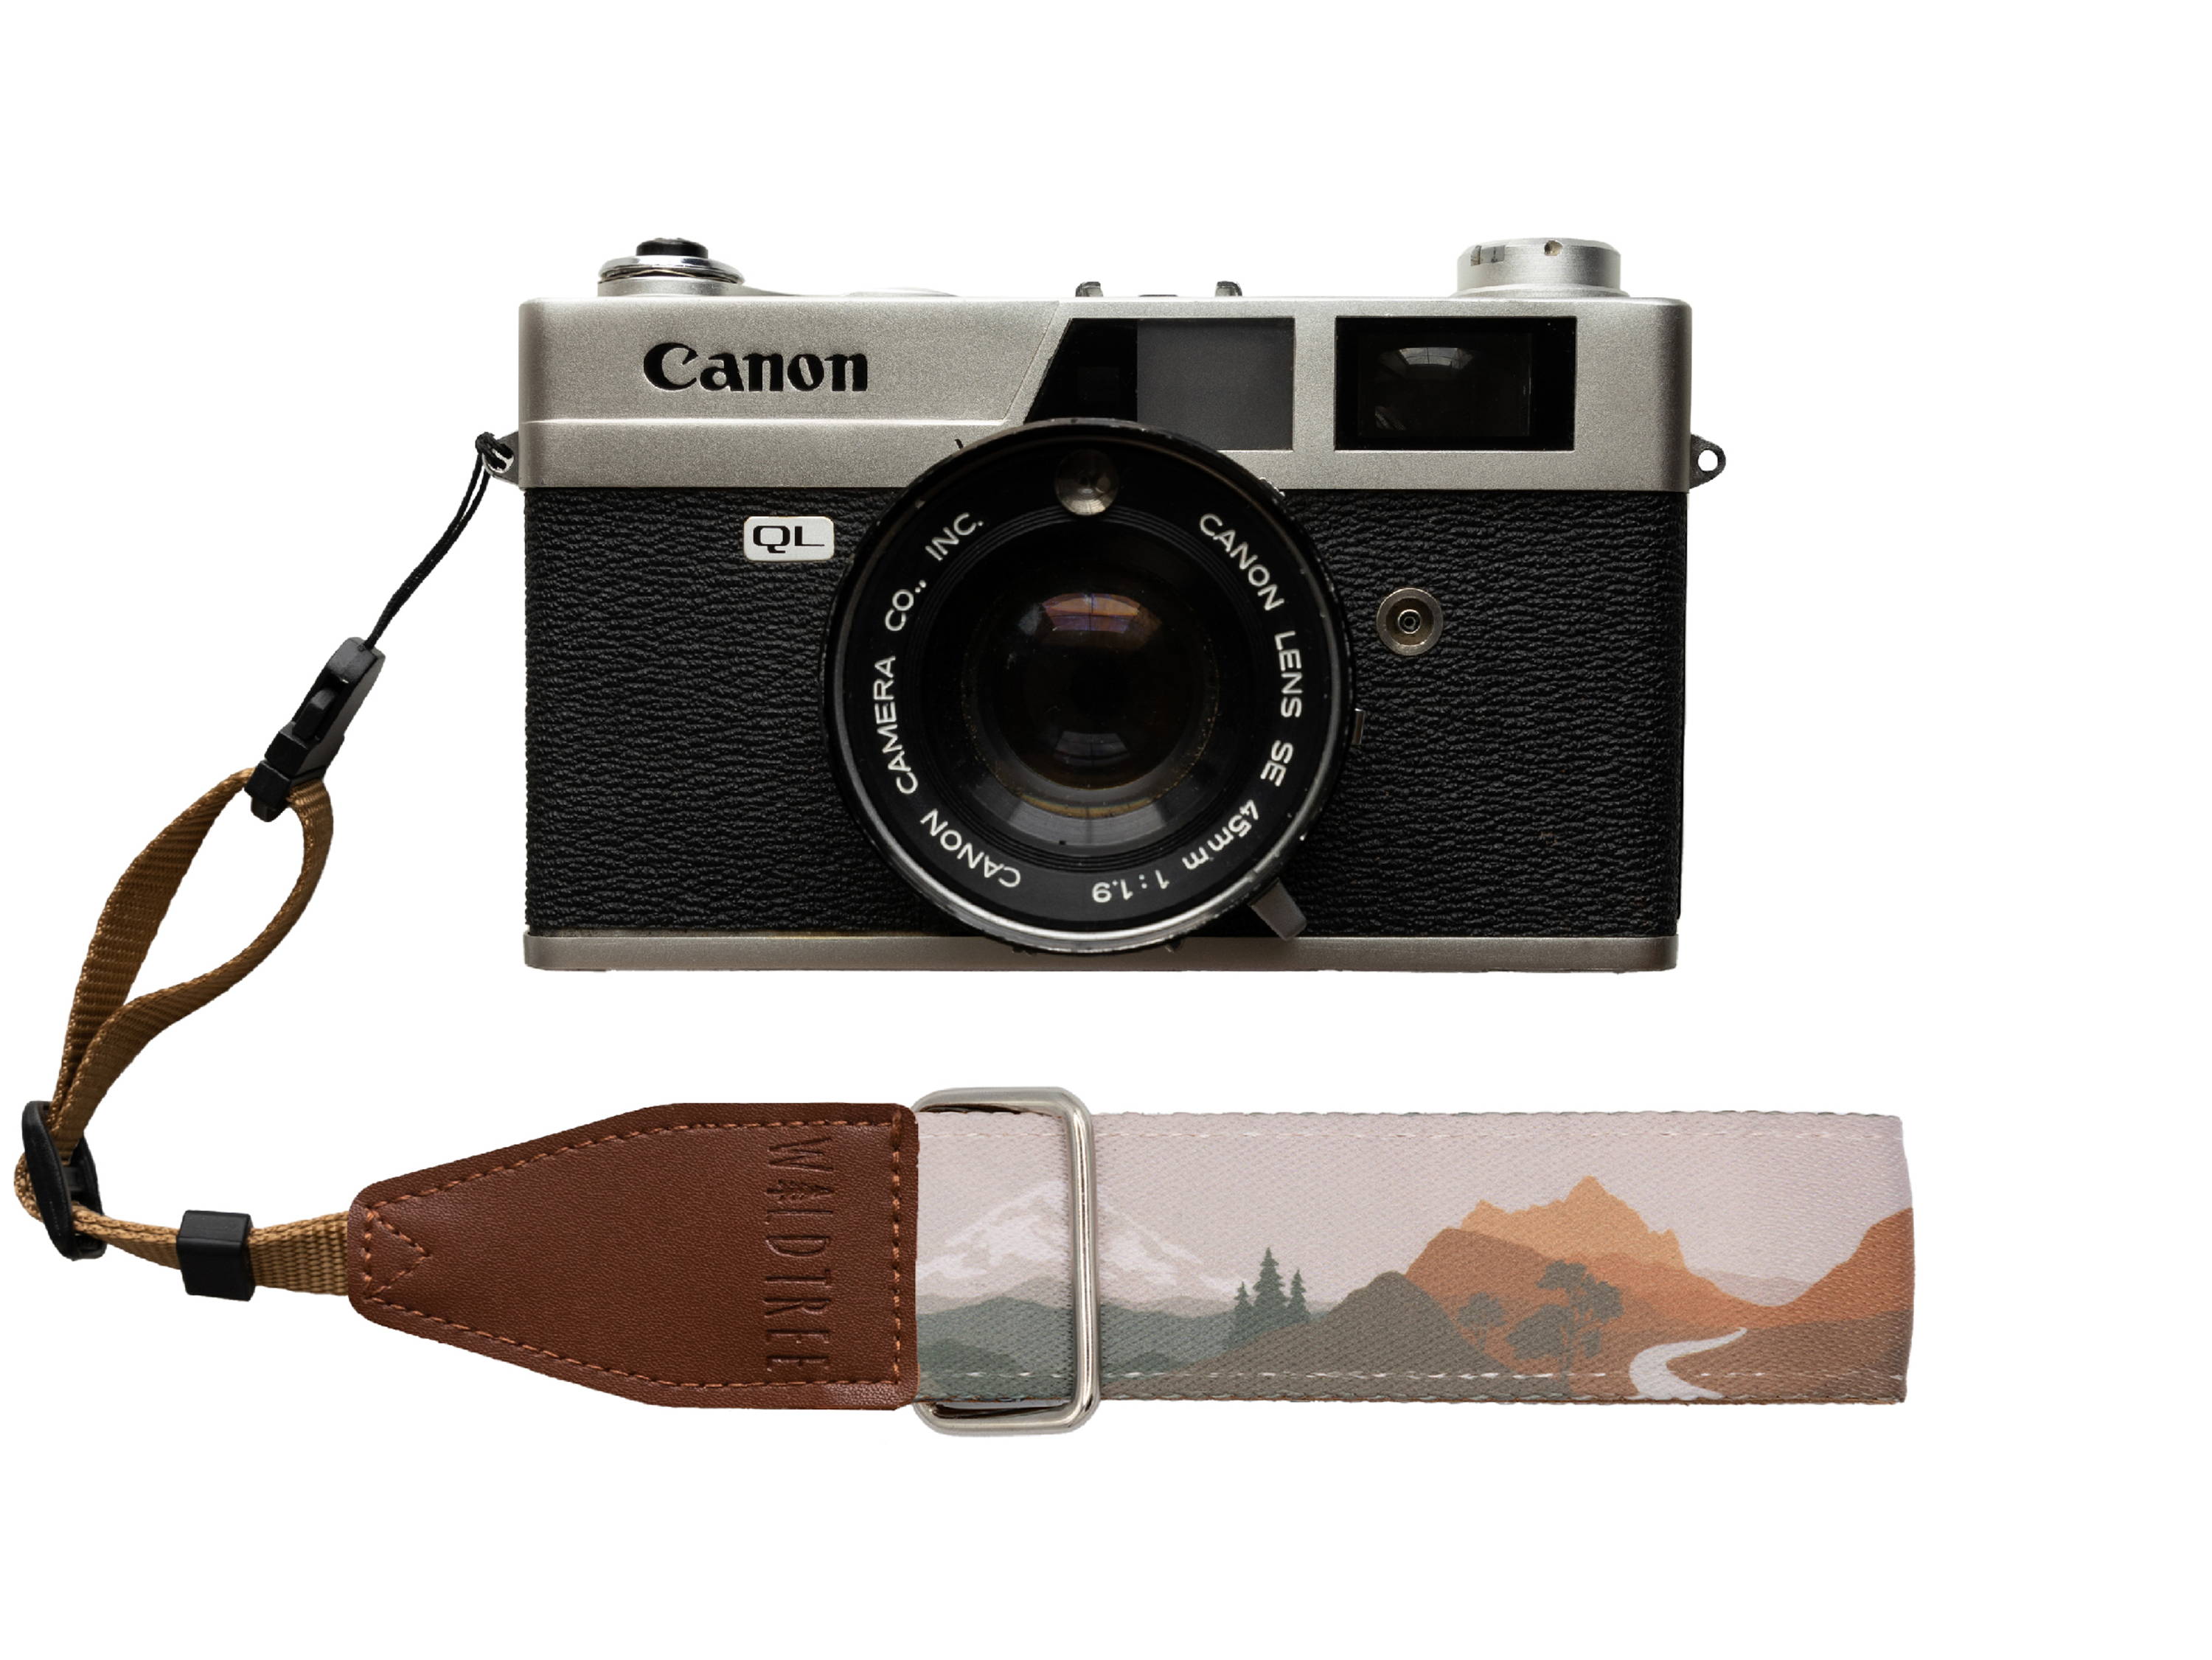 a cannon camera with a national park inspired camera wrist strap.